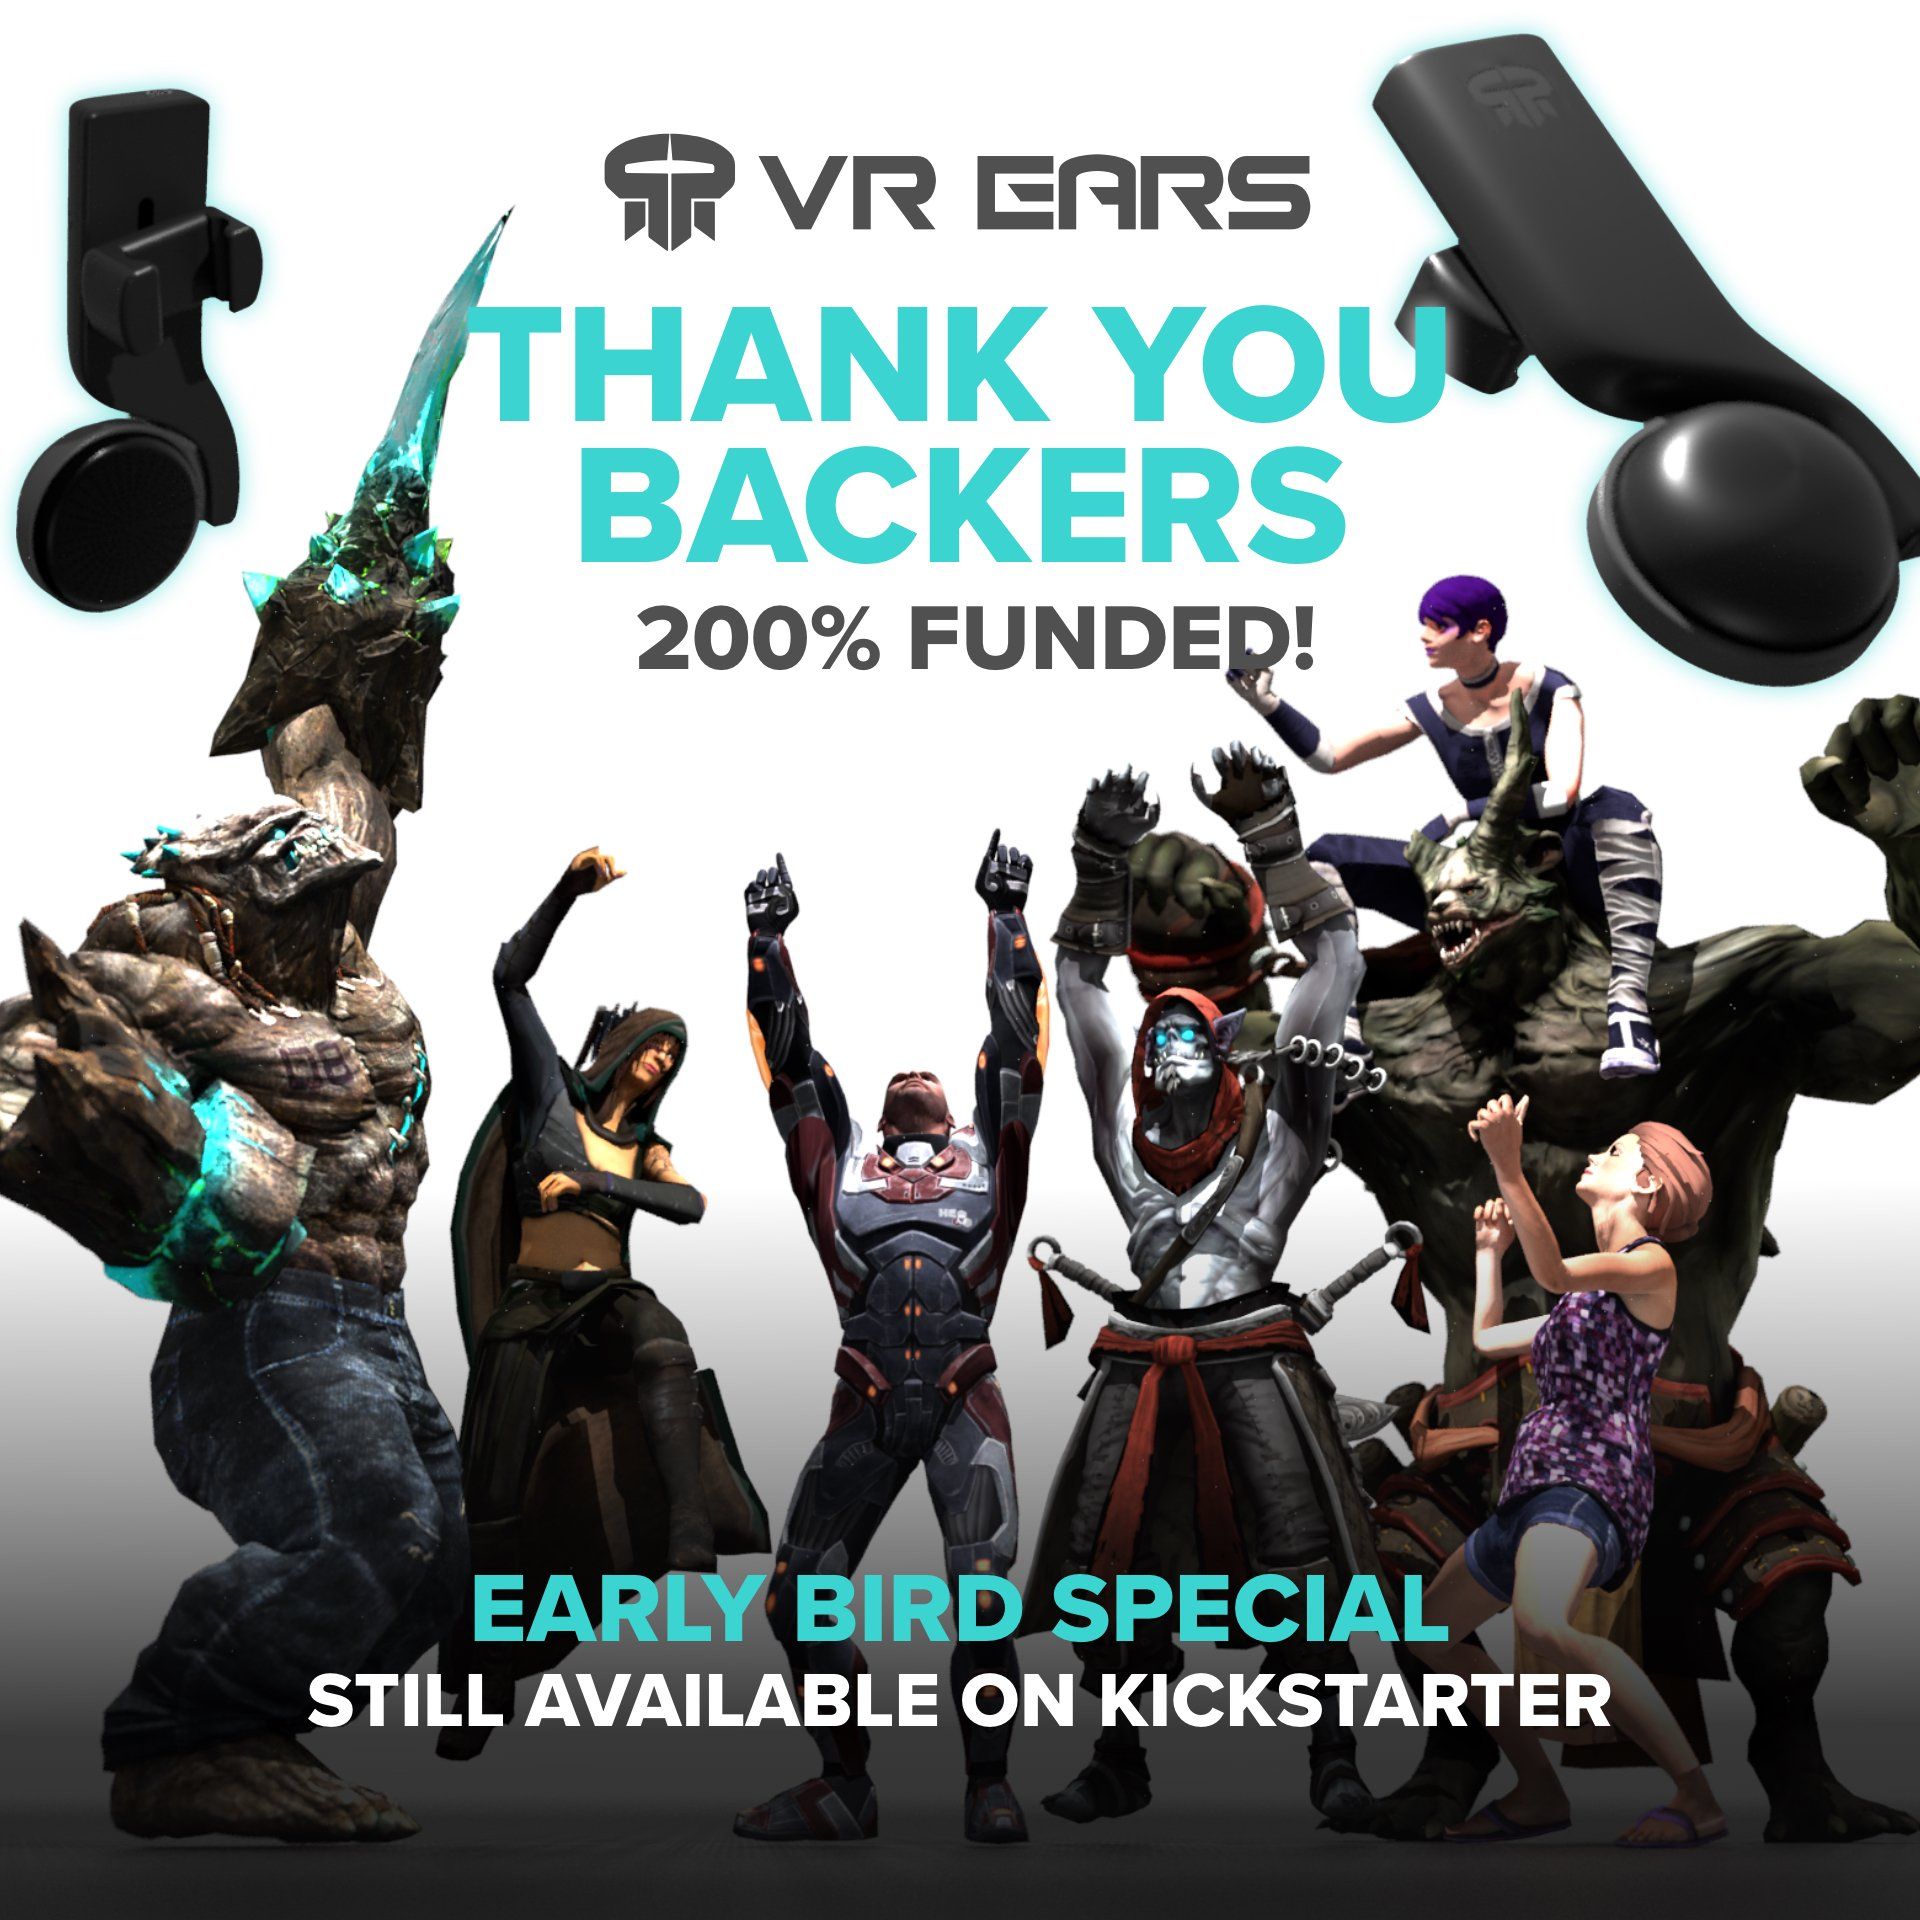 Thank you backers